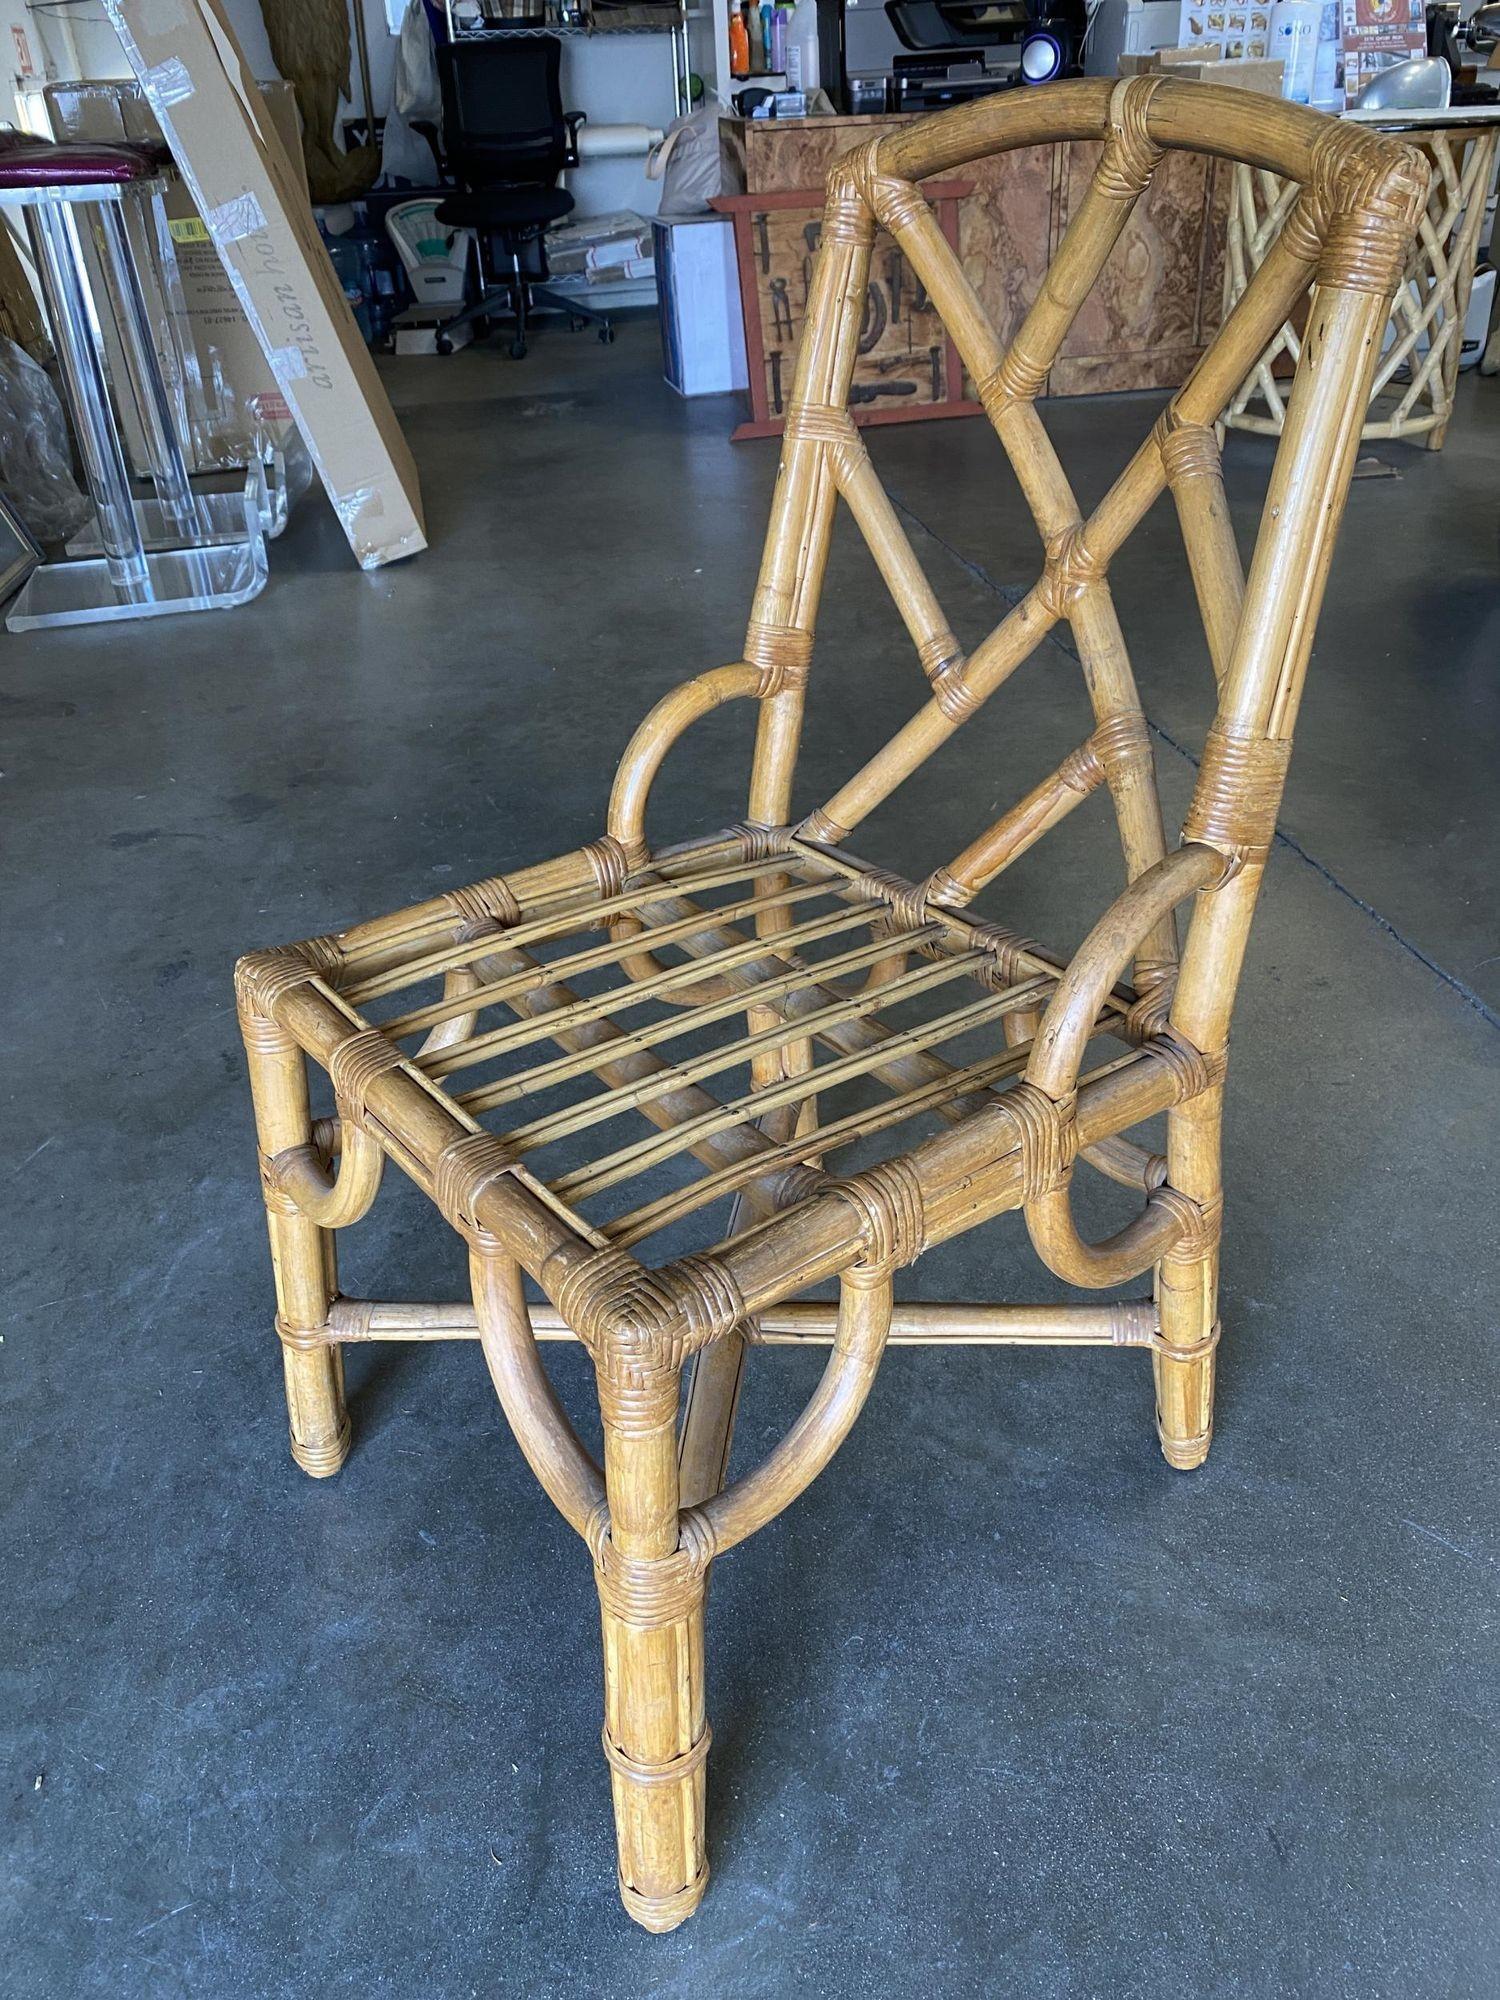 Vintage midcentury slat leg rattan dining room chair with geometric back by designer Paul Frankl, included is a set of 4 side chairs and 2 matching armchairs. The side chairs feature a slanted slat design with the armchairs having the same geometric